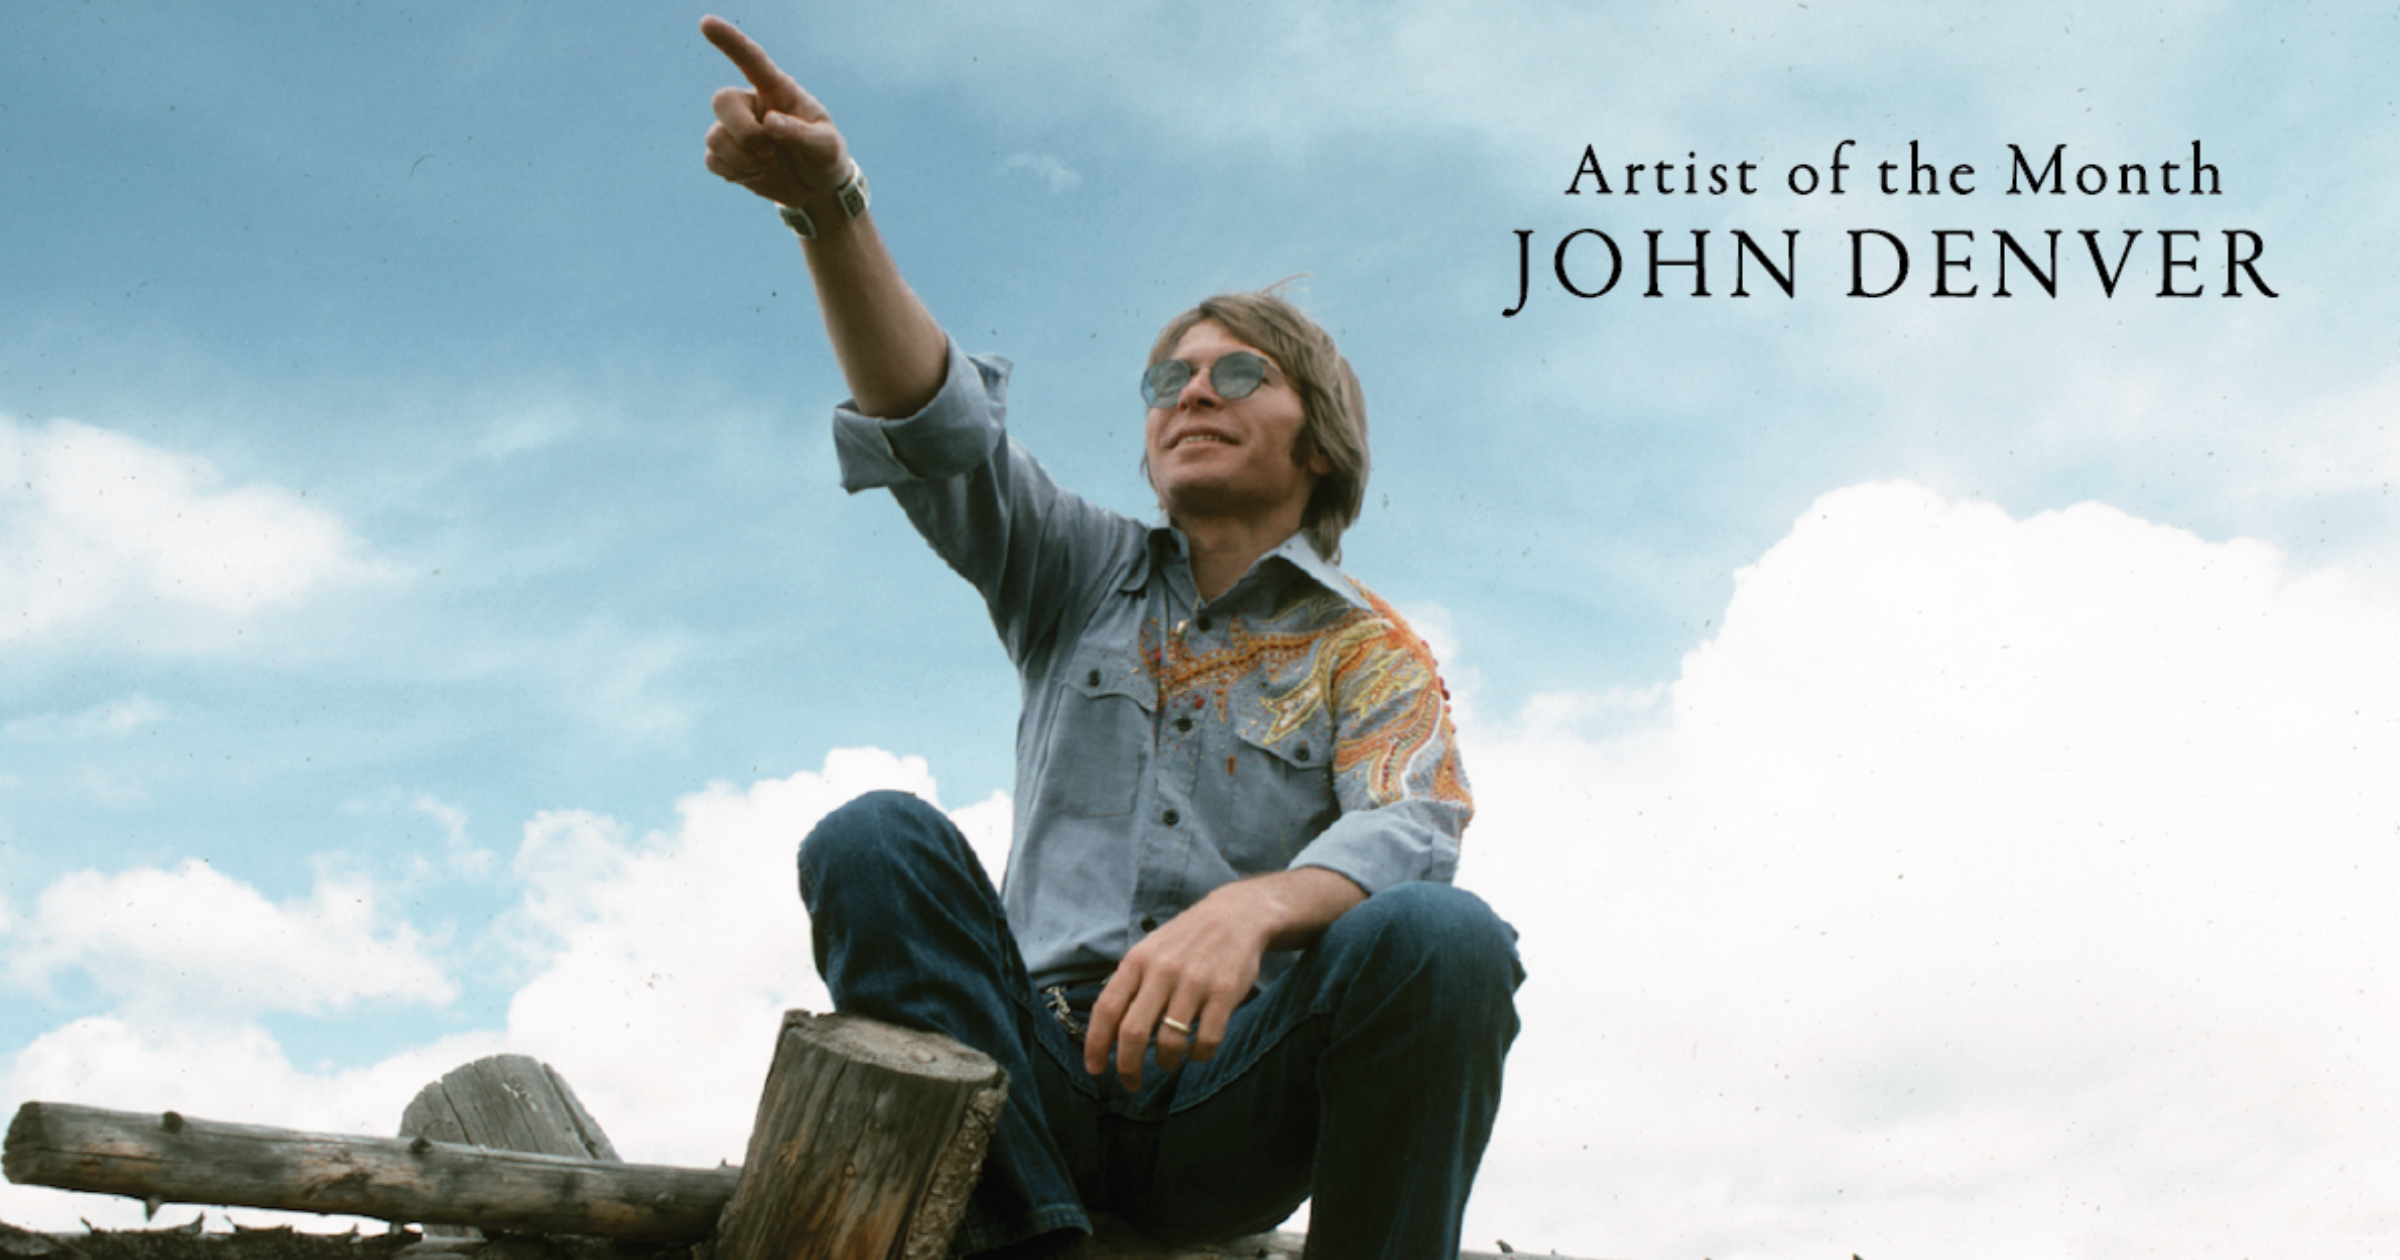 25 Years After His Death, John Denver Leaves a Far Out Legacy